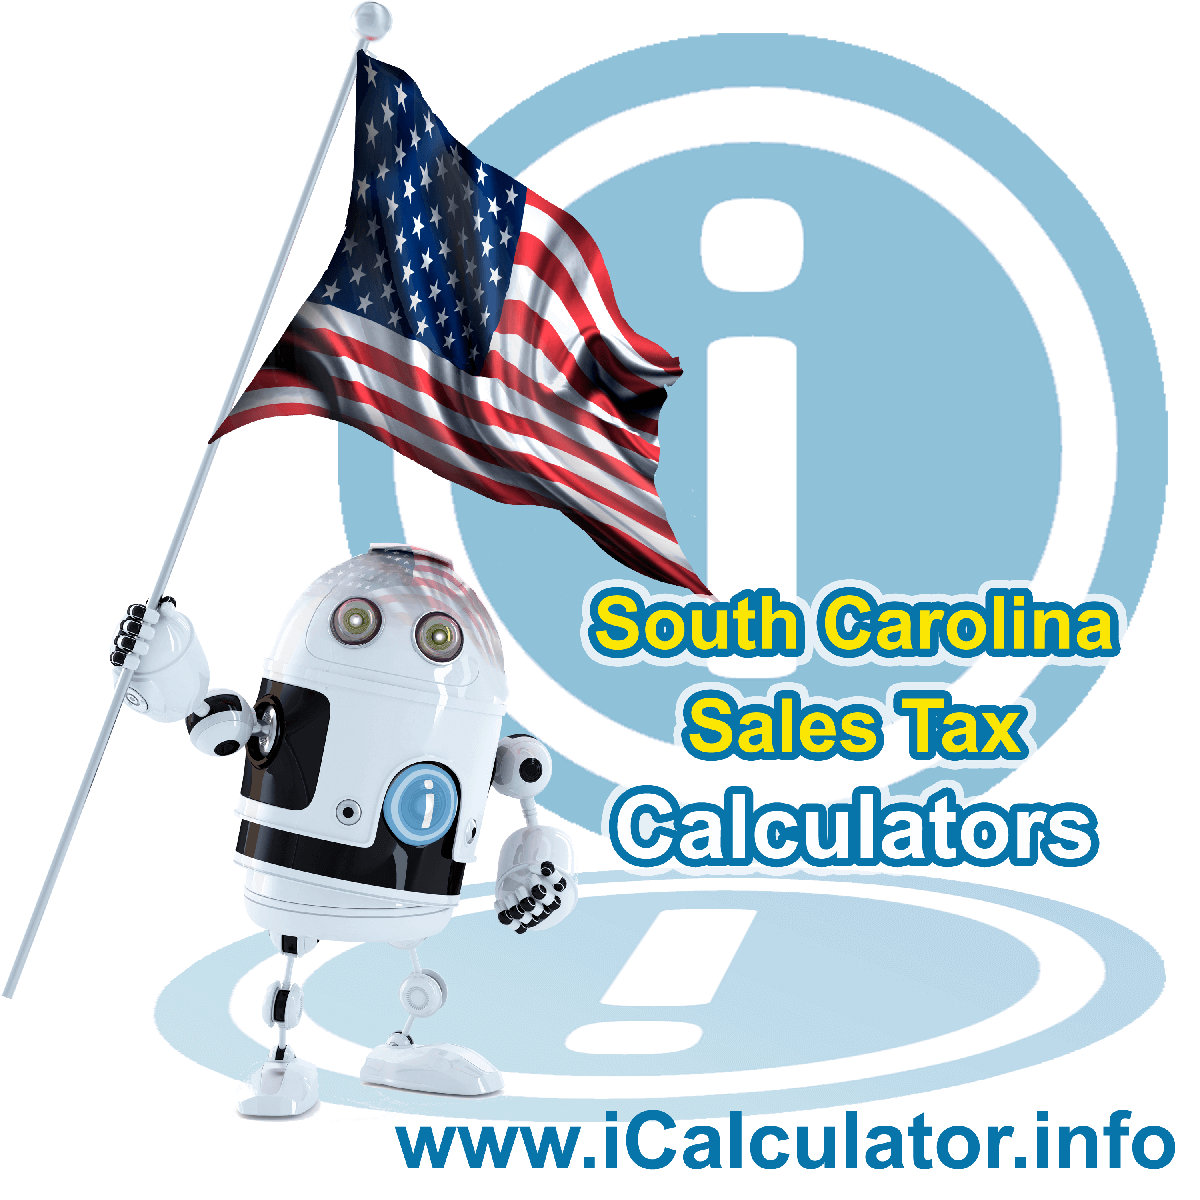 Furman Sales Rates: This image illustrates a calculator robot calculating Furman sales tax manually using the Furman Sales Tax Formula. You can use this information to calculate Furman Sales Tax manually or use the Furman Sales Tax Calculator to calculate sales tax online.